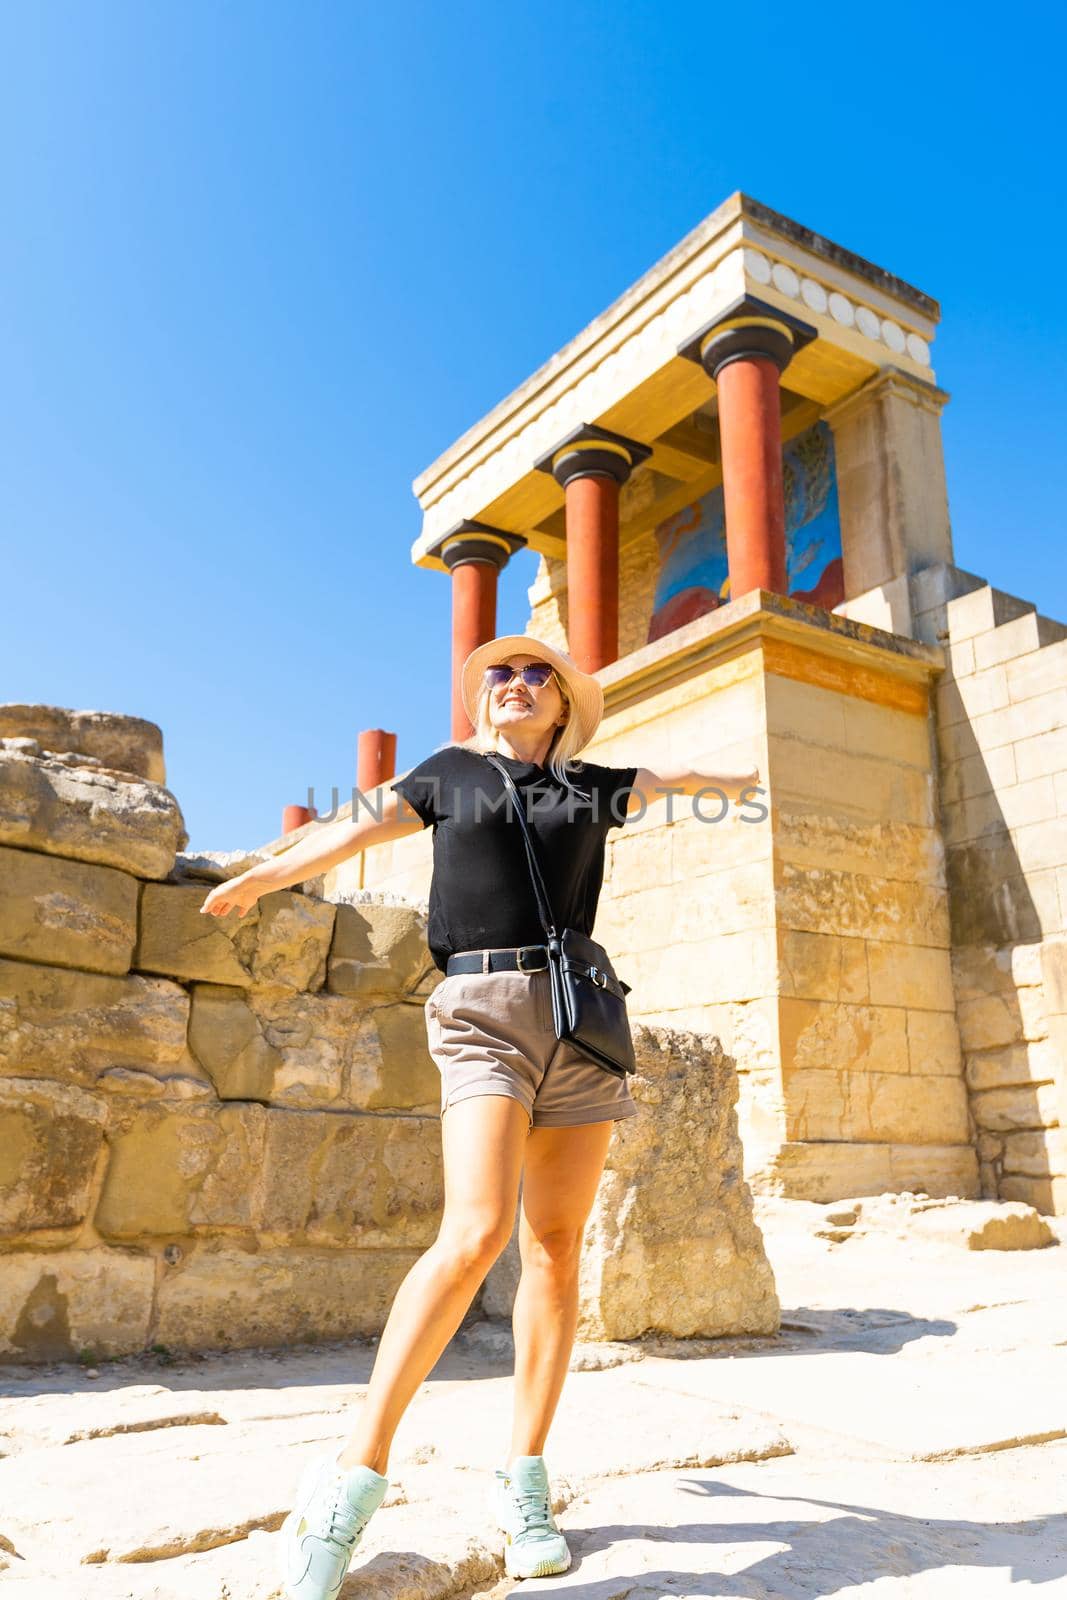 Knossos Palace ruin in sunny day, Crete, Greece